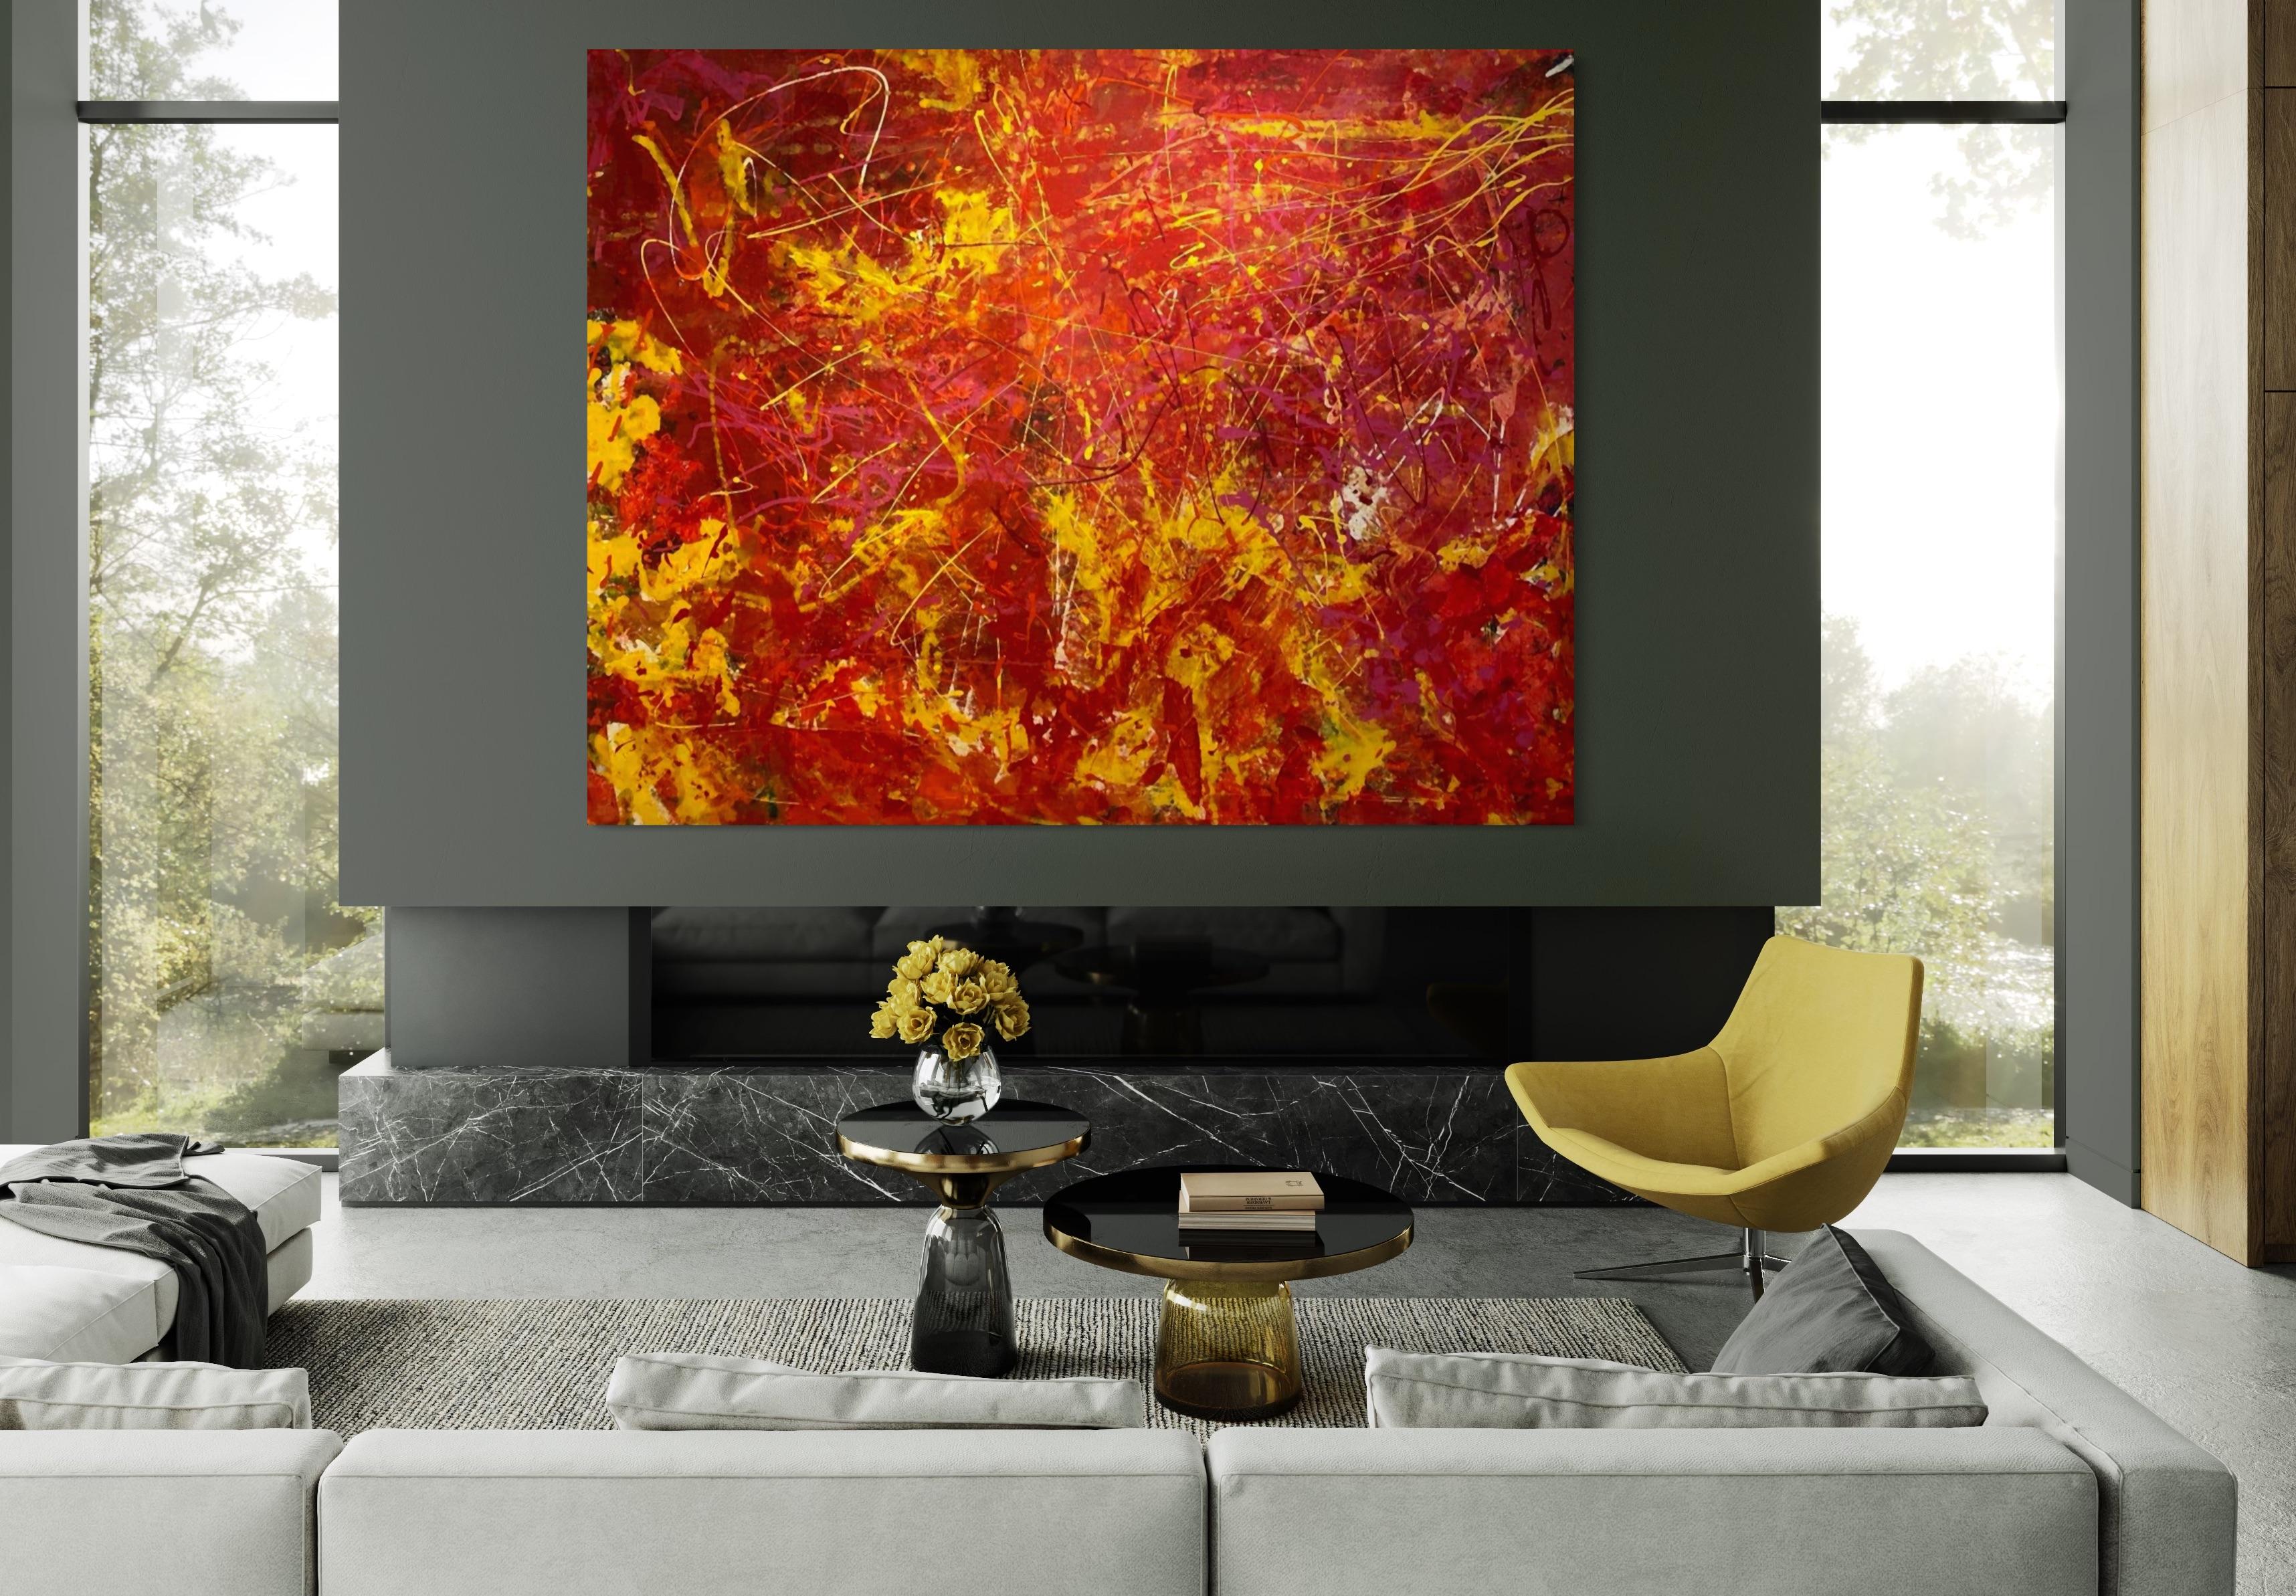 'Passion' Large Contemporary Yellow And Red Abstract Mixed Media by Nan - Painting by Nan Van Ryzin